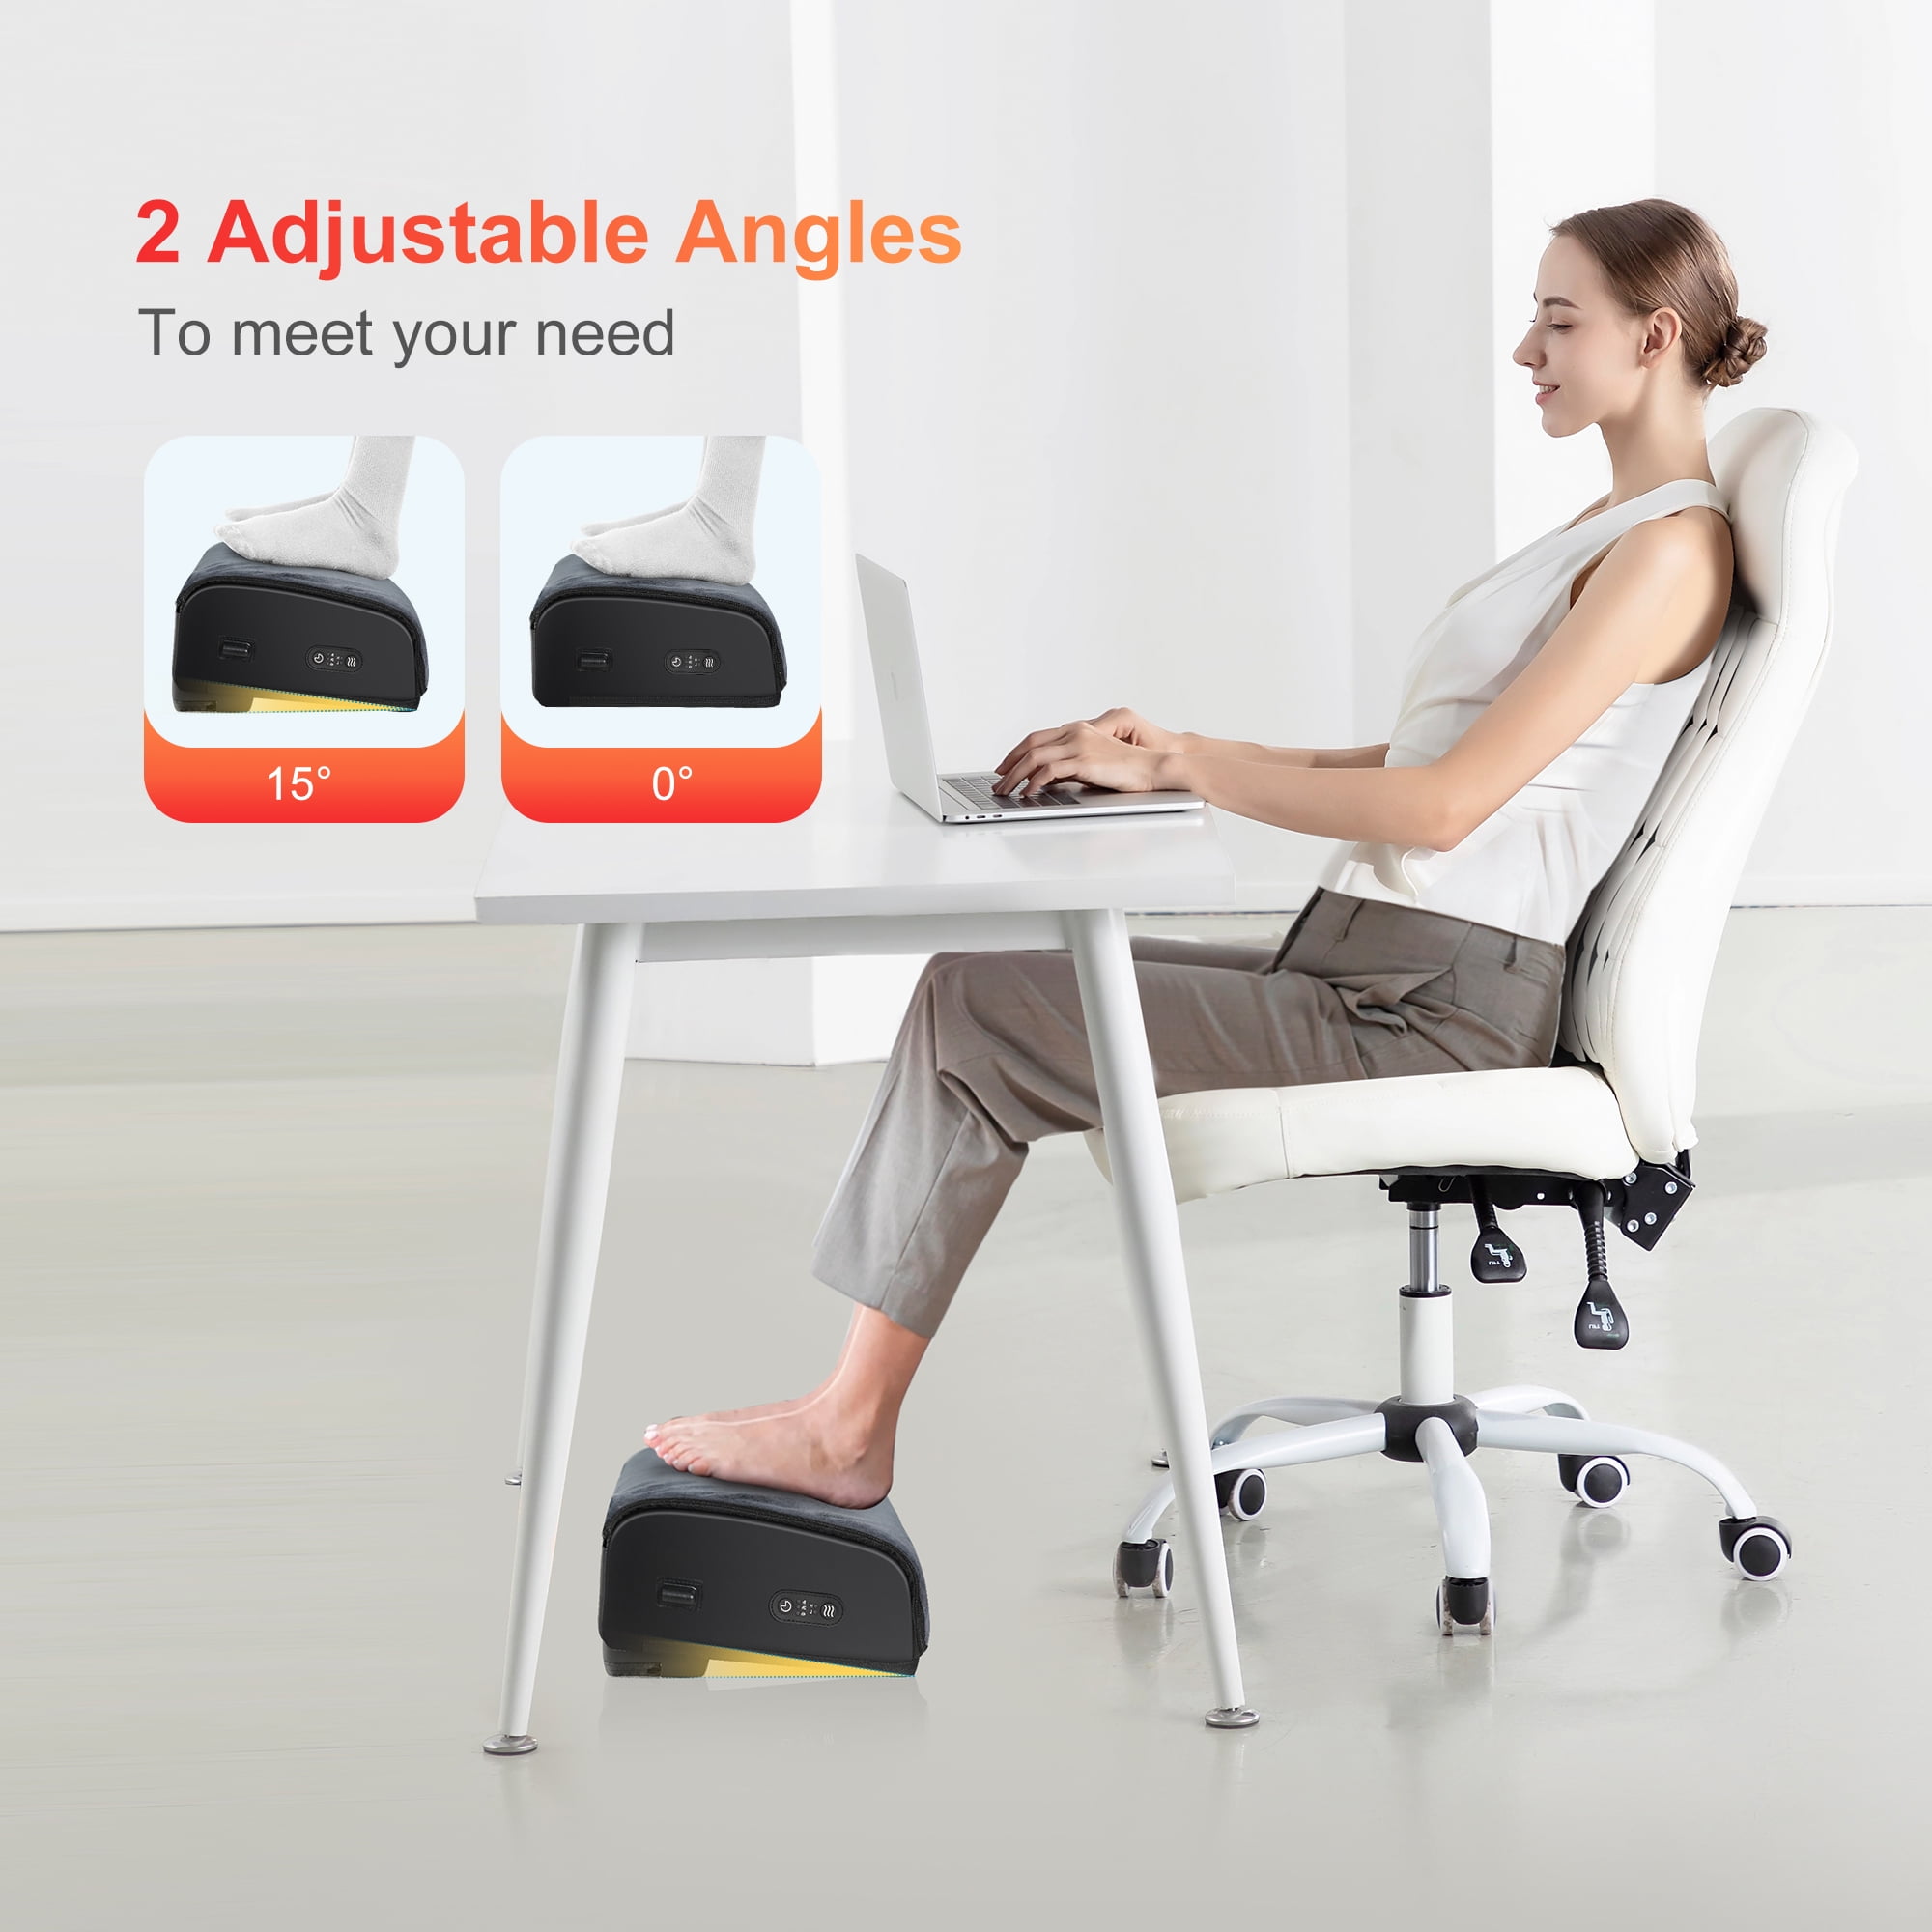 Snailax Foot Rest Under Desk, Heated Under Desk Footrest with Double Layer Adjustable Height, Feet Warmer with Vibration Massage Home Footstool for